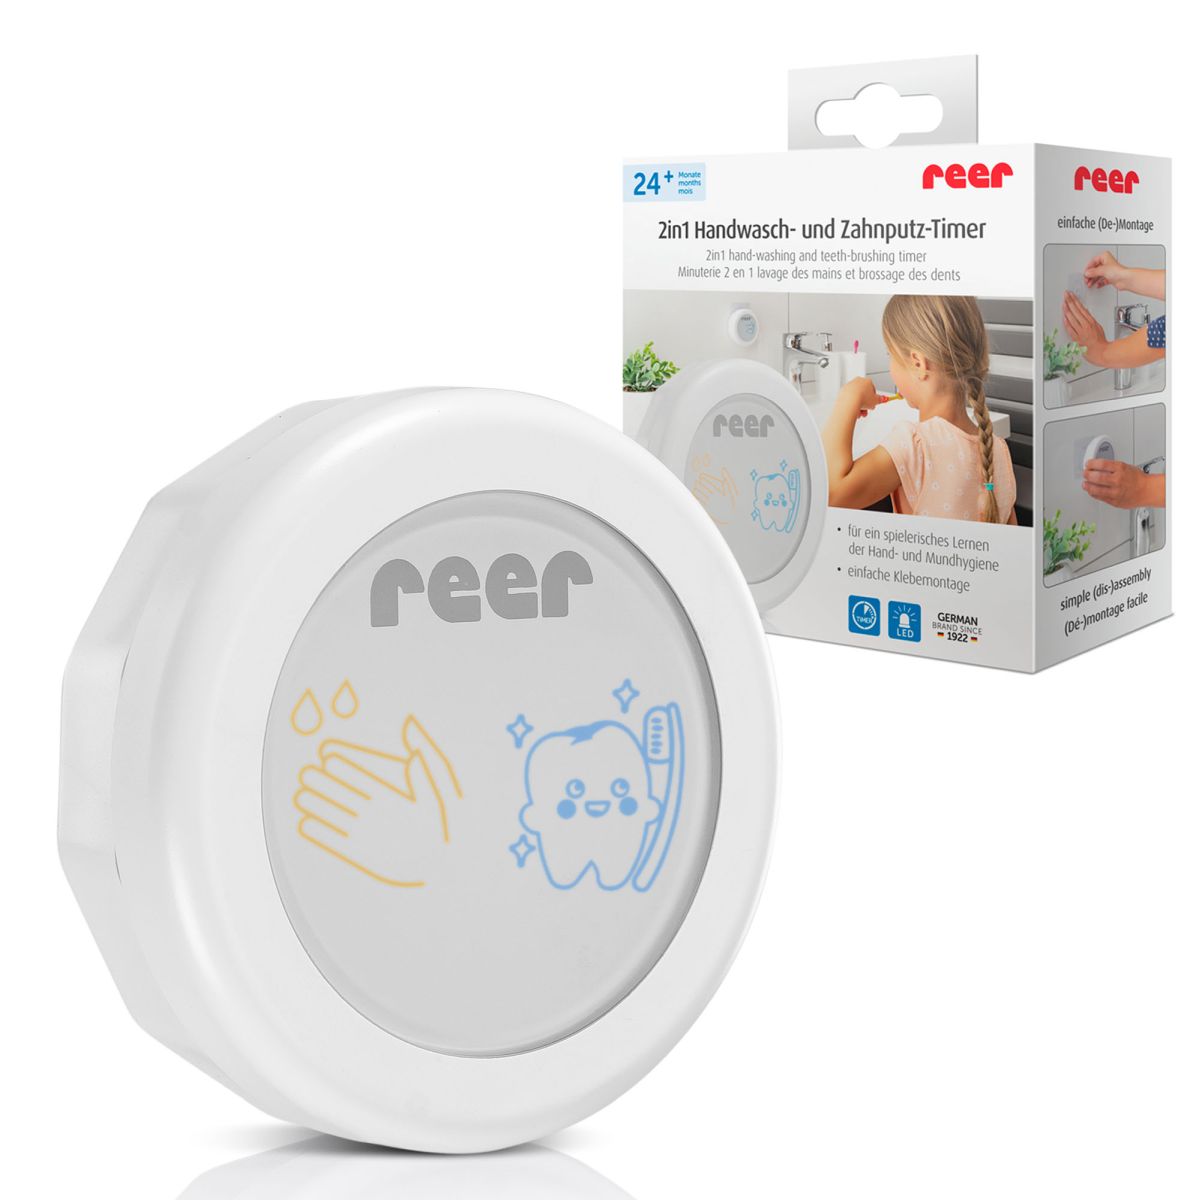 2in1 hand-washing and teeth-brushing timer